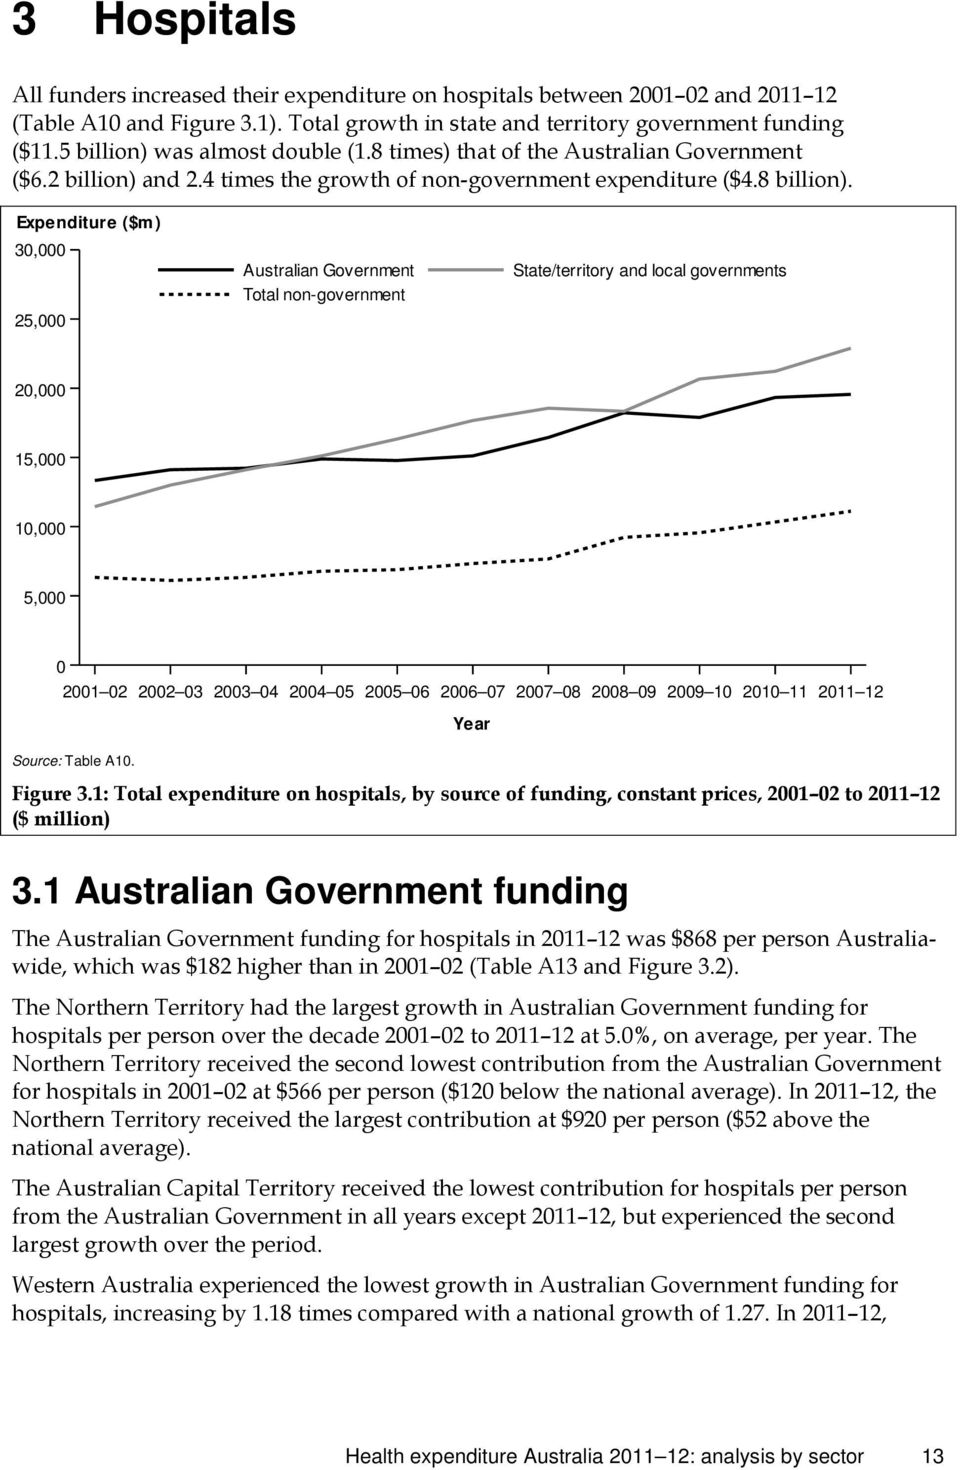 Expenditure 30,000 25,000 Australian Government Total non-government State/territory and local governments 20,000 15,000 10,000 5,000 0 2001 02 2002 03 2003 04 2004 05 2005 06 2006 07 2007 08 2008 09